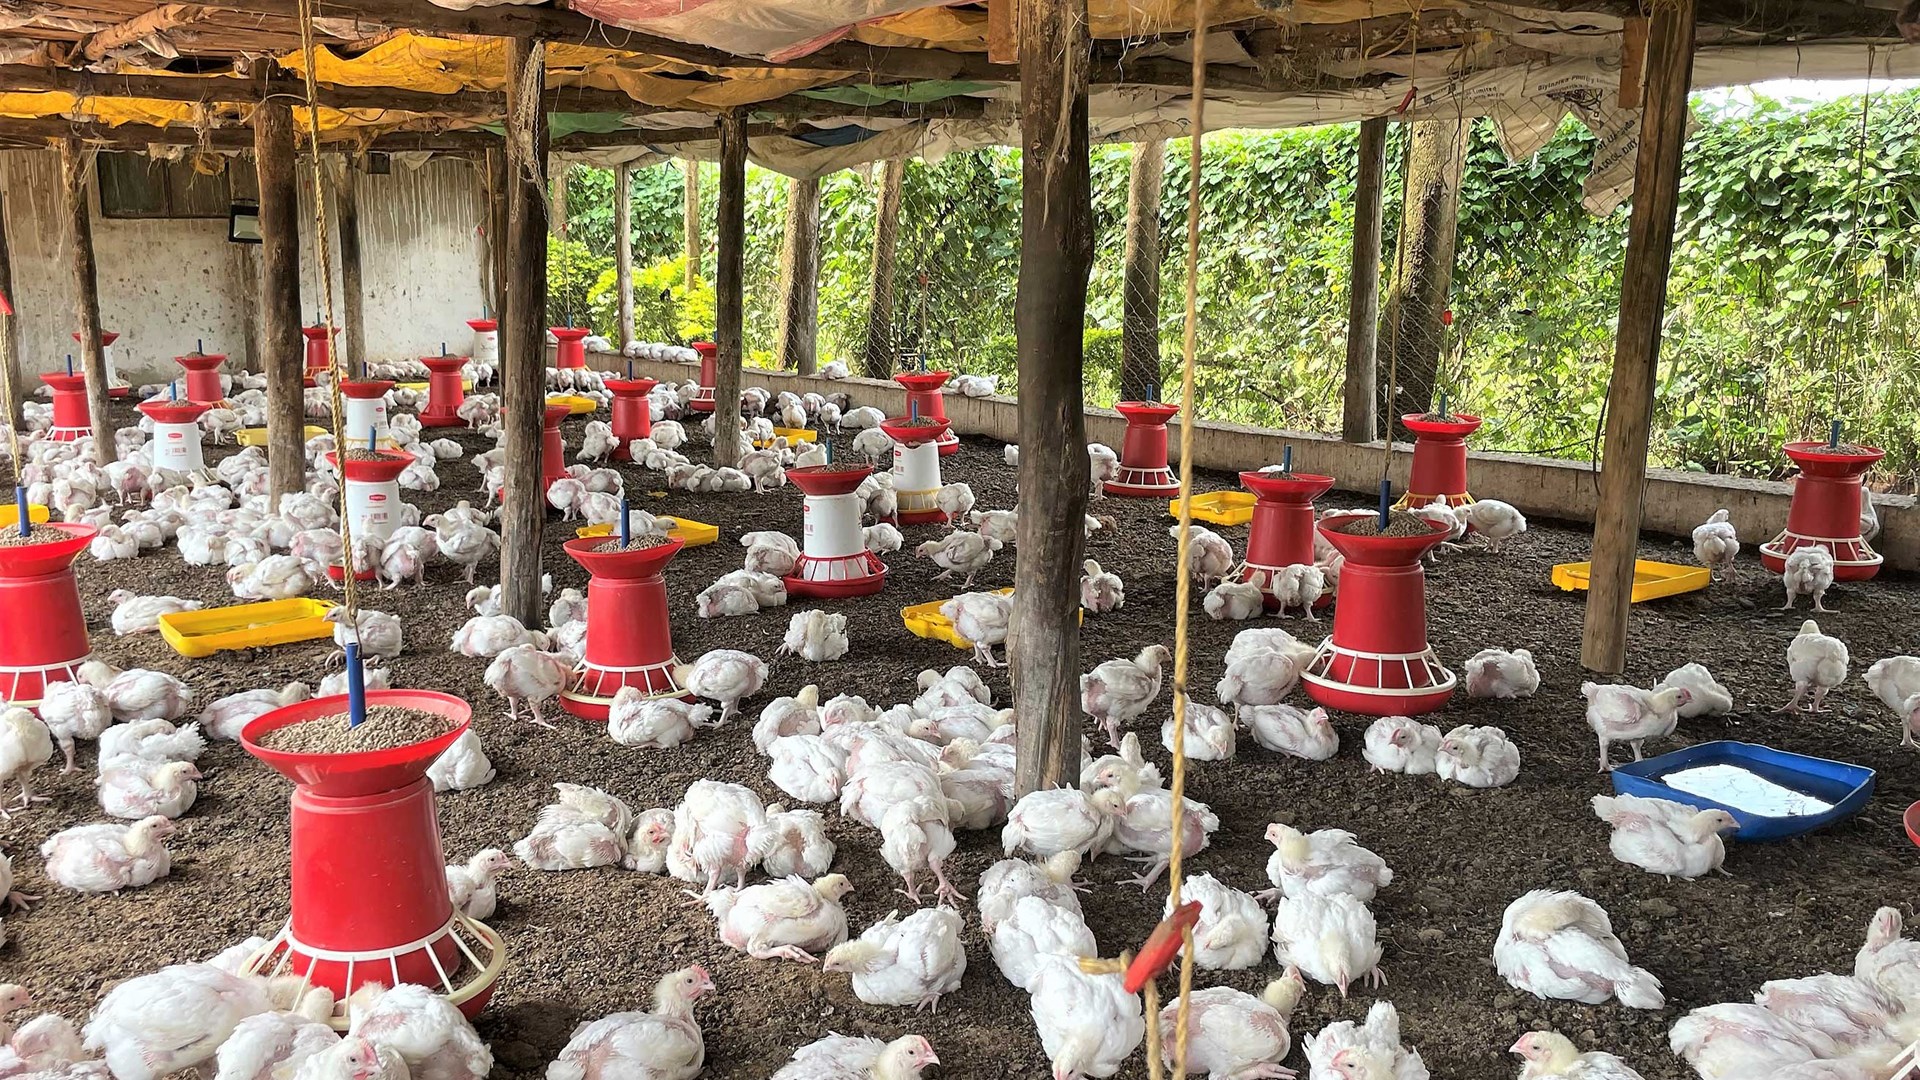 2-storey house with enclosure poultry at a production facility in Uganda. Photo.